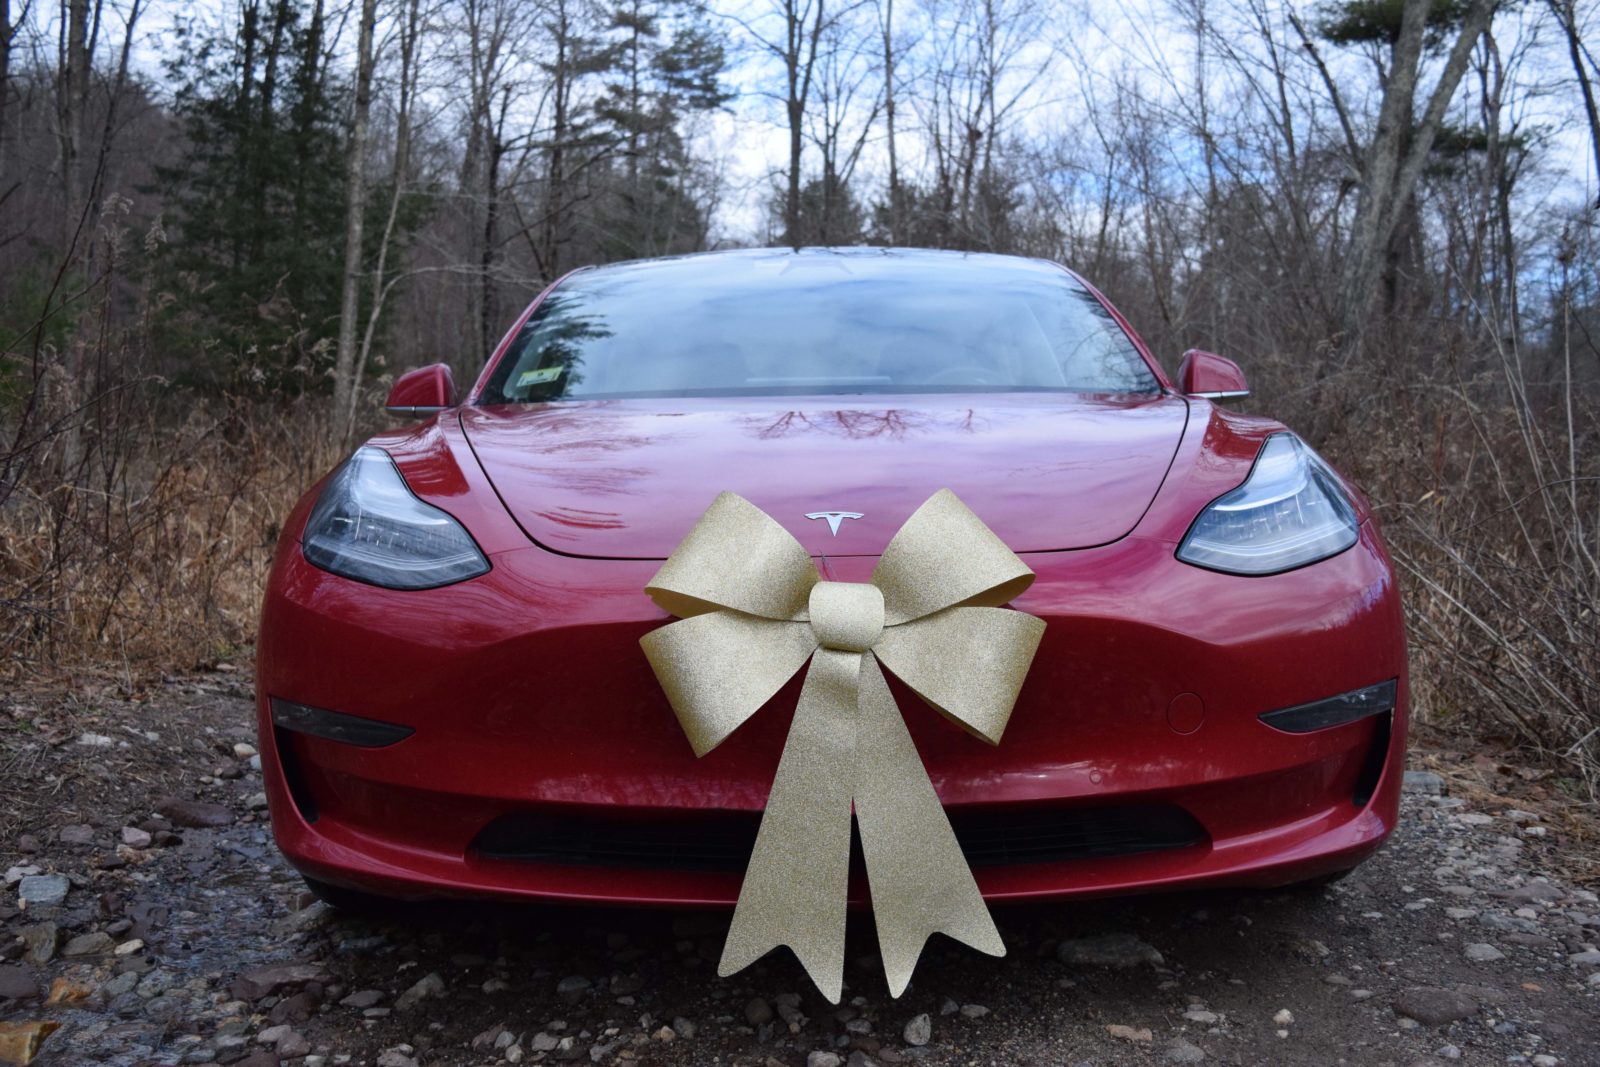 Red Tesla Model 3 Electric car with gold bow on the hood in a forest of brown trees with no leaves